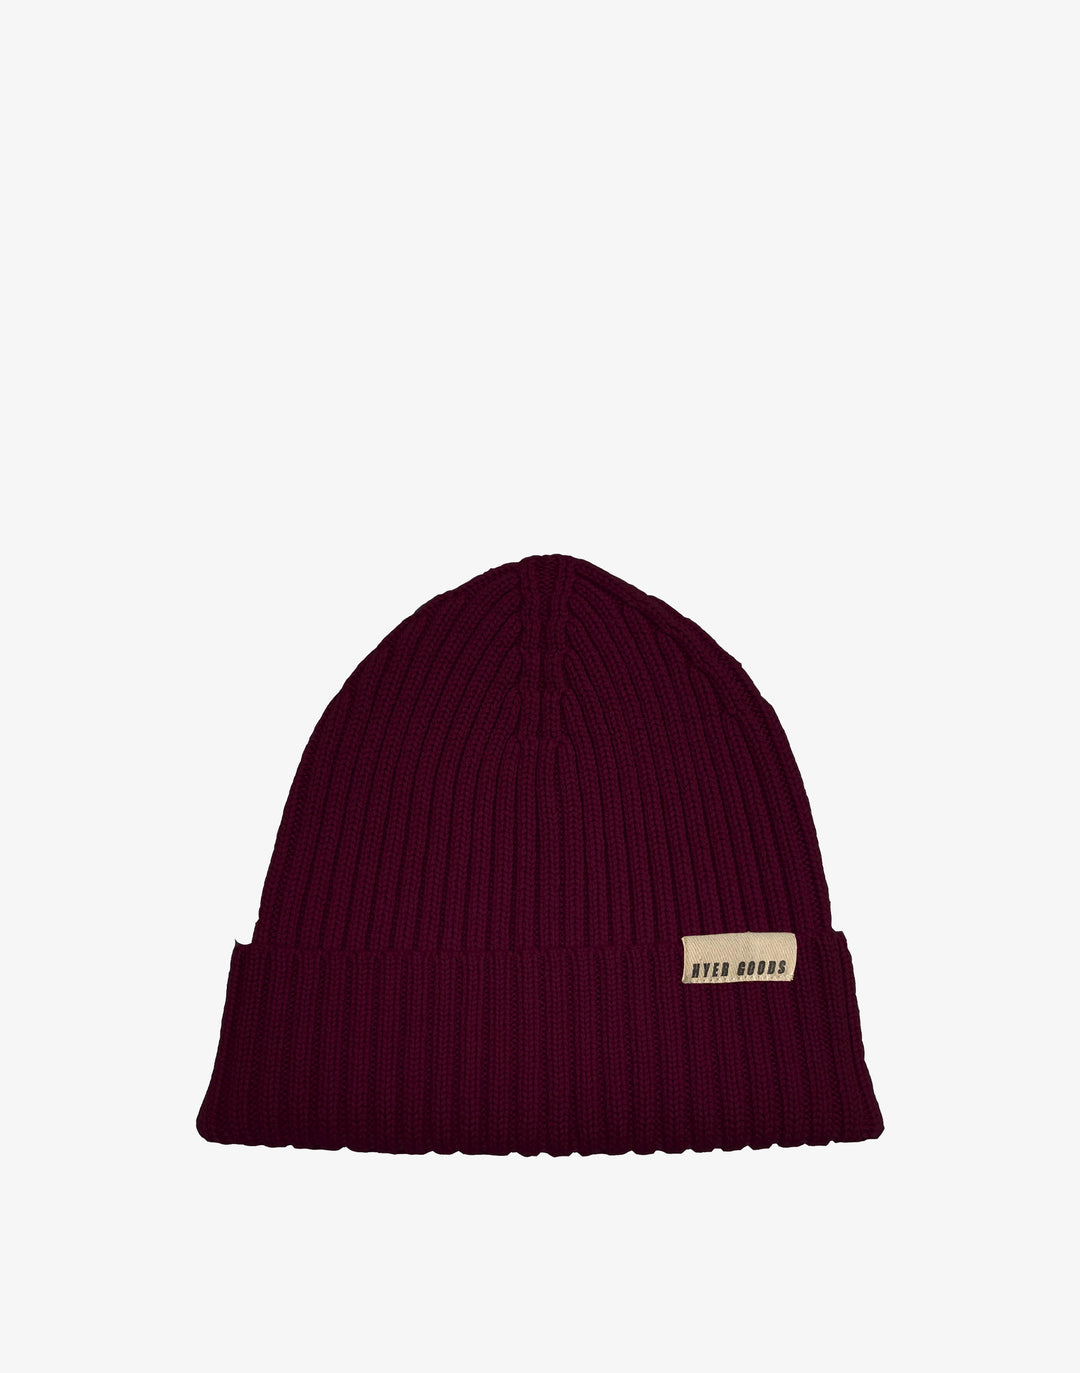 Hyer Goods_A Better Beanie_Wine_#color_wine